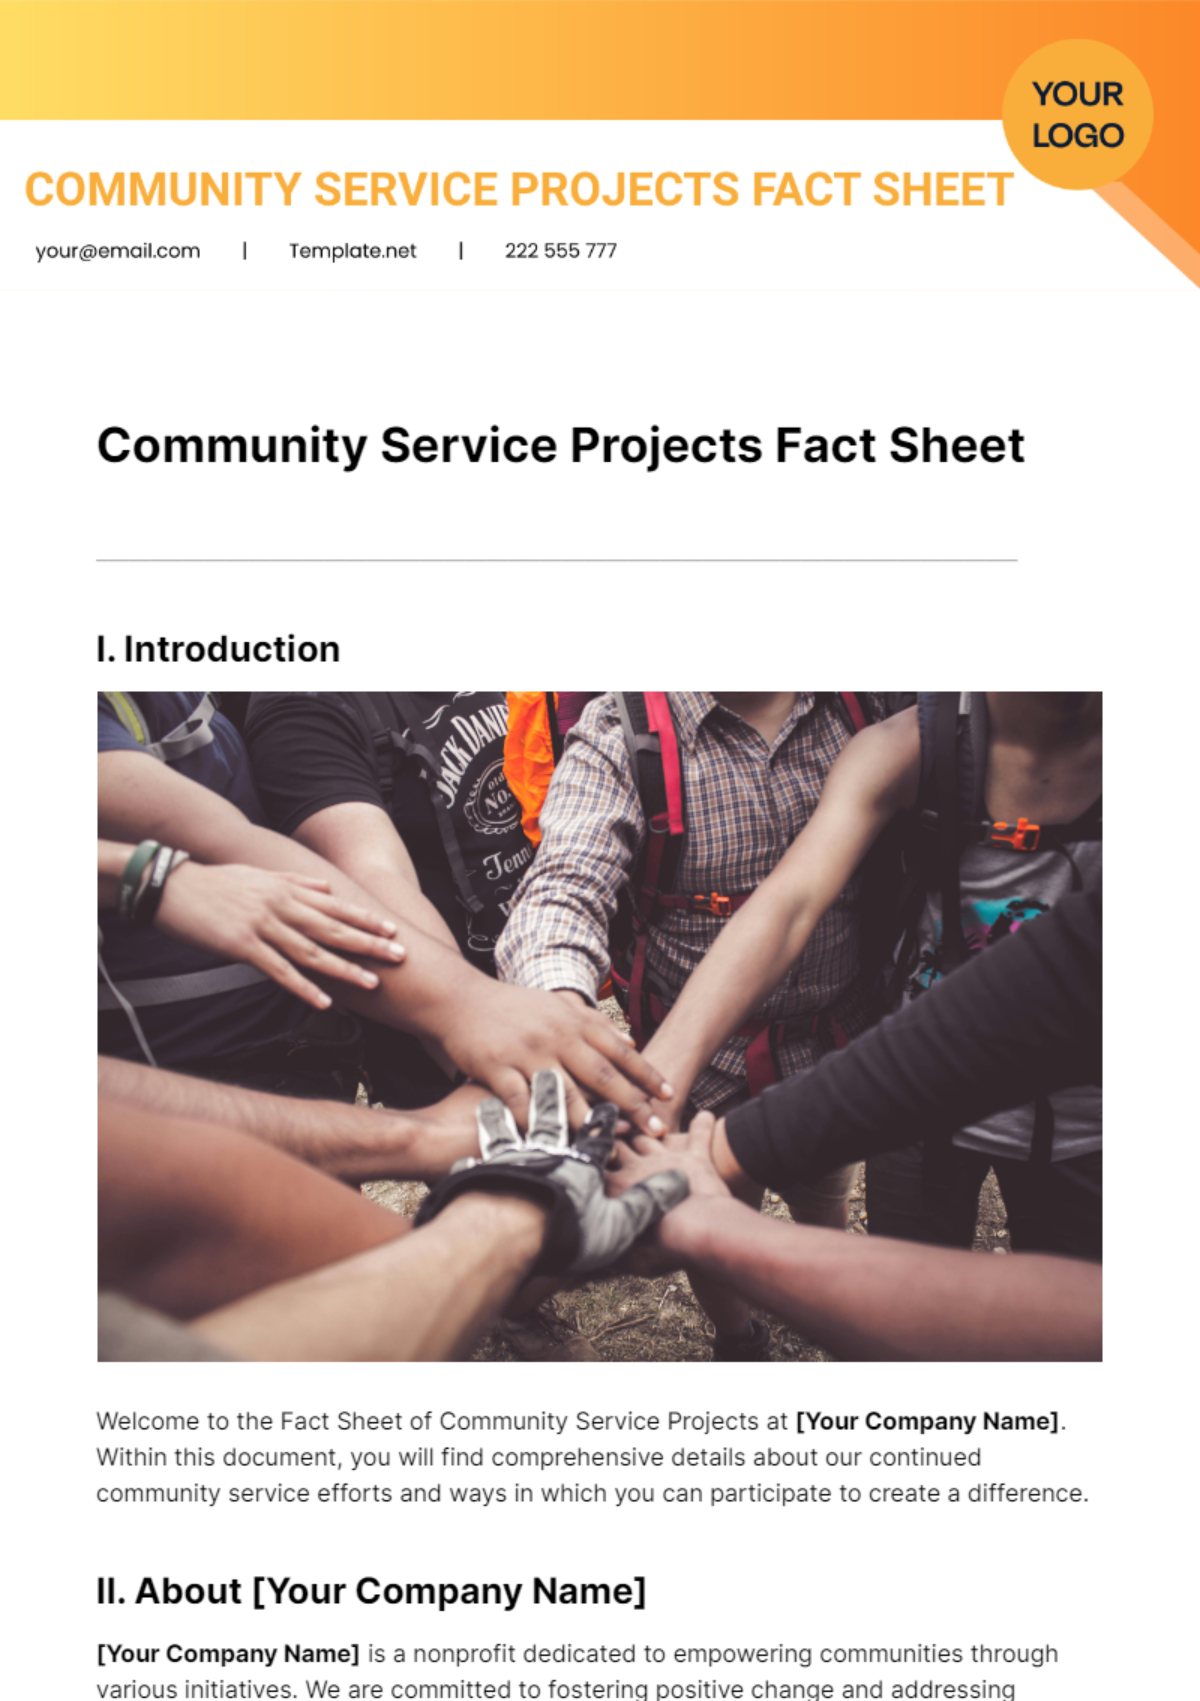 Community Service Projects Fact Sheet Template